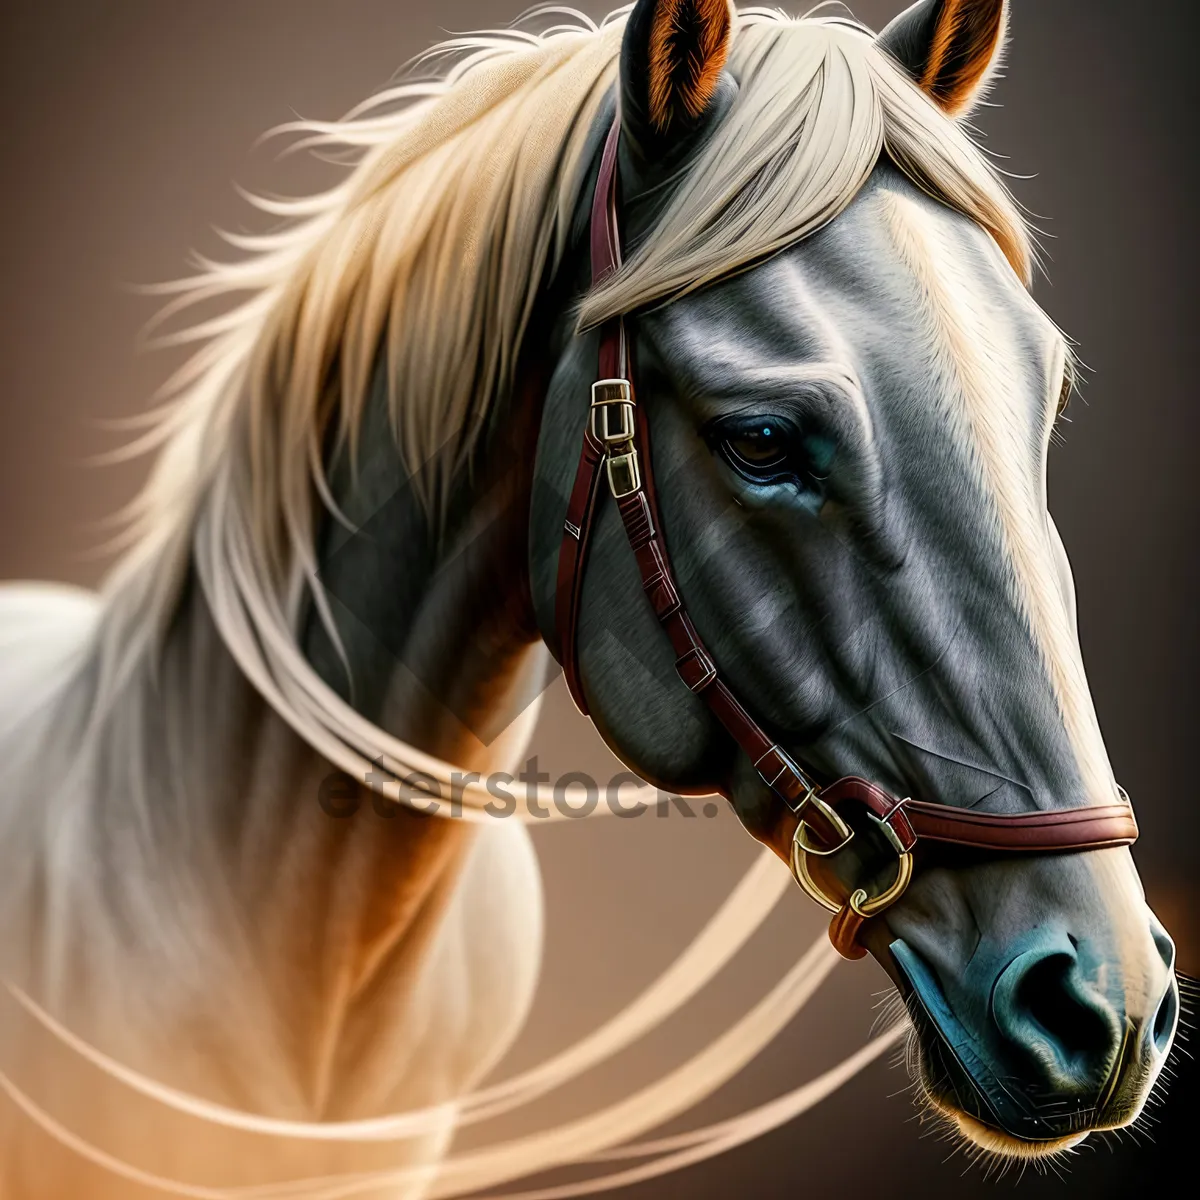 Picture of Wild Stallion Portrait - Majestic Brown Horse with Snaffle Bit